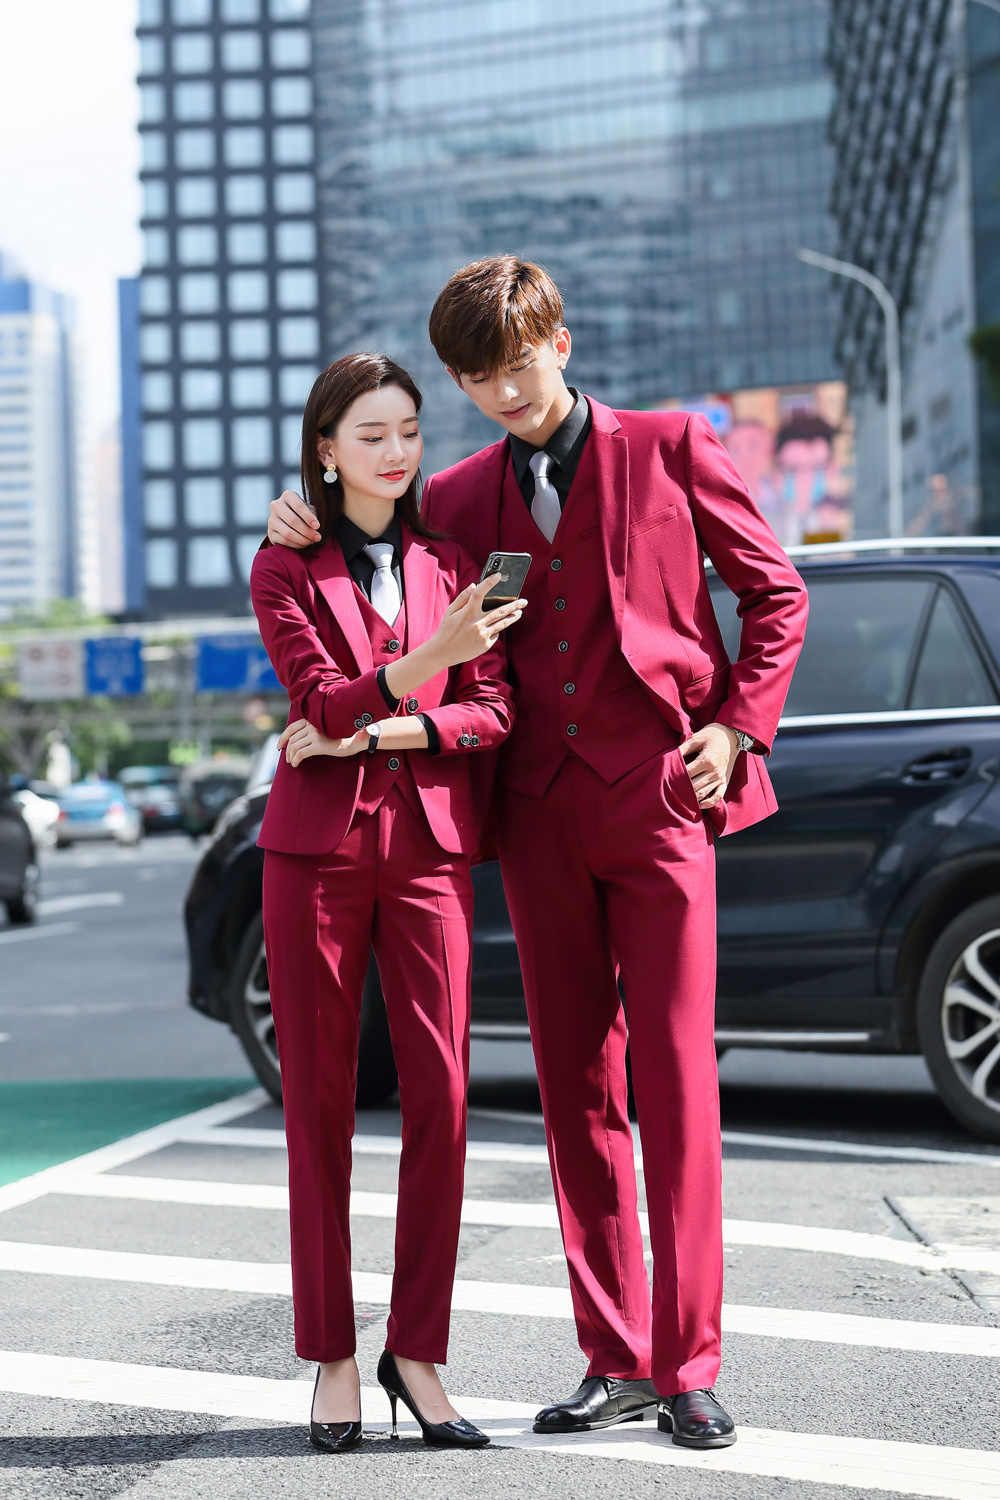 matching suit.. 50+ Stylish Formal Matching Outfits for Couples - 27